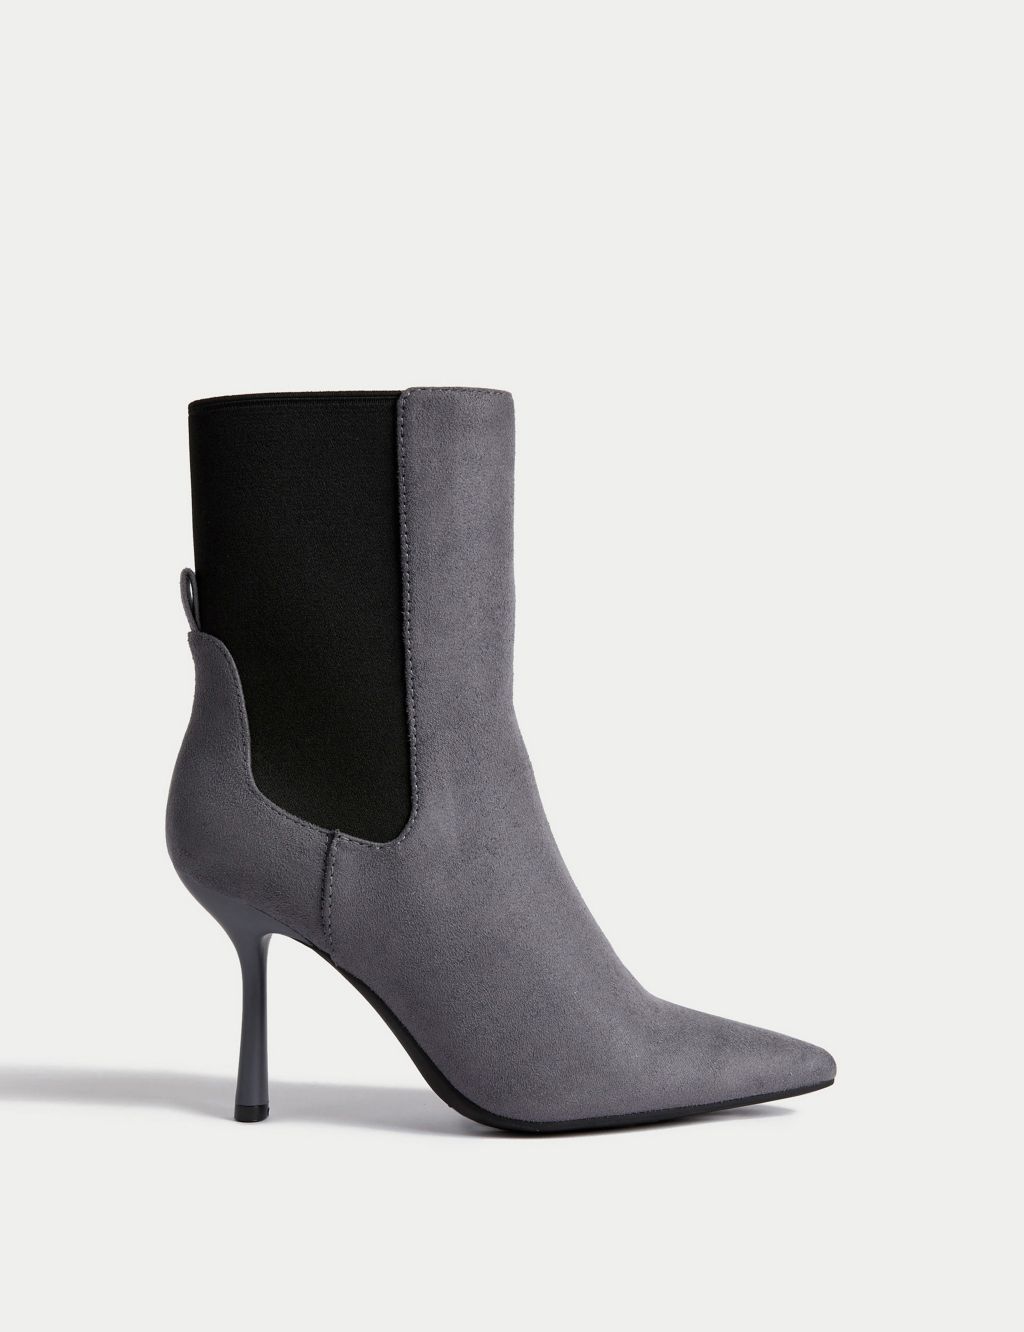 Stiletto Heel Pointed Ankle Boots image 1